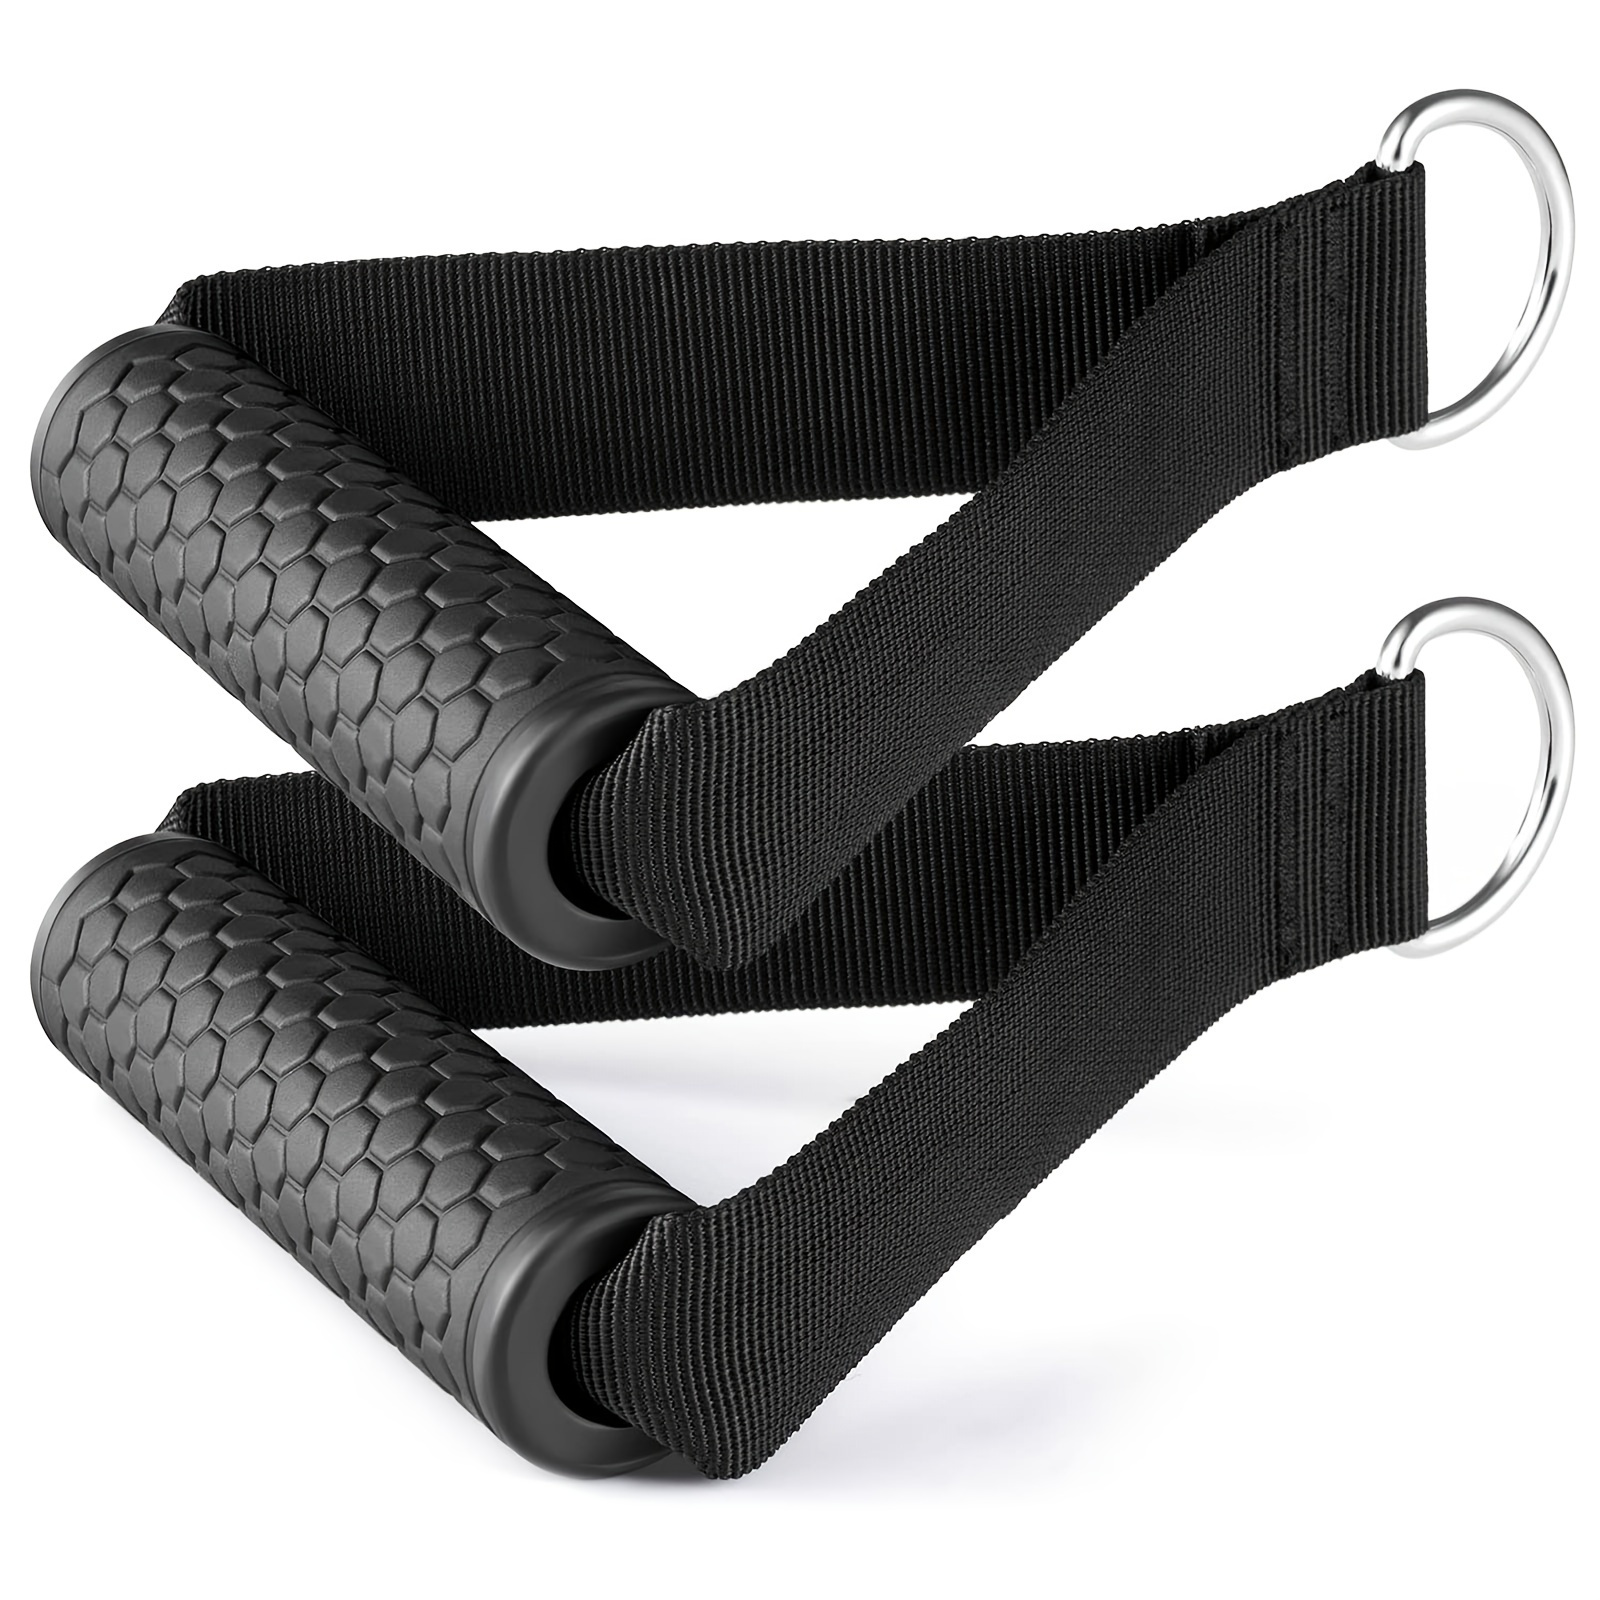 

Heavy Duty Resistance Band Handles: Cable Machine Attachments Exercises With Solid Abs Core For Maximum Strength Training